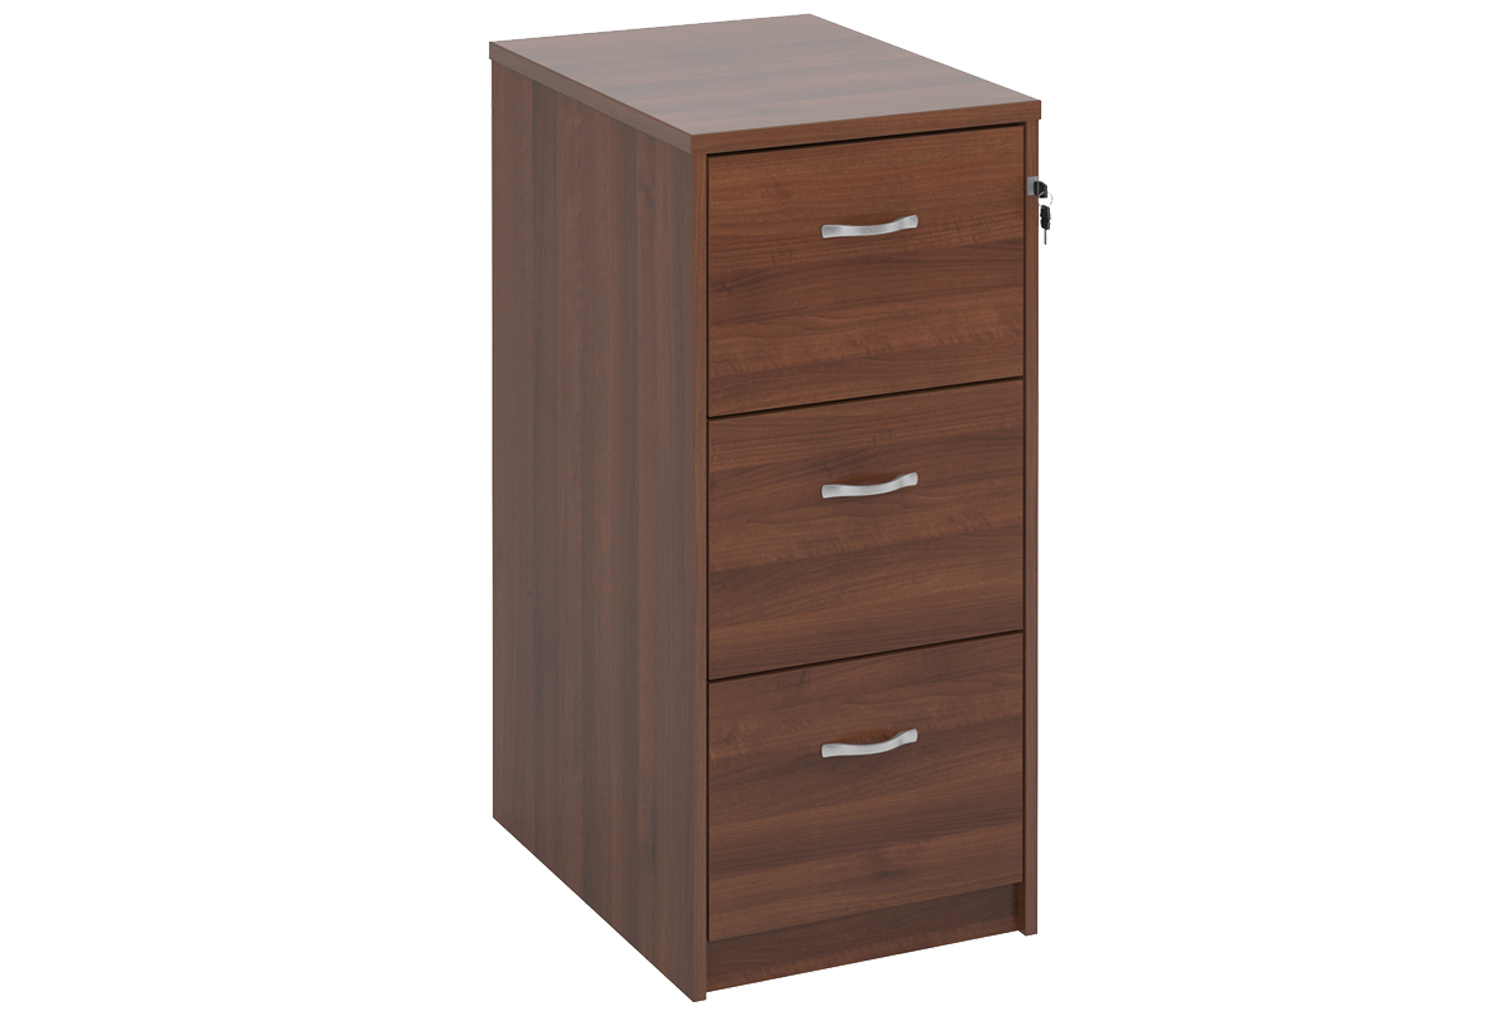 Tully Filing Cabinets, 3 Drawer - 48wx66dx105h (cm), Walnut, Express Delivery